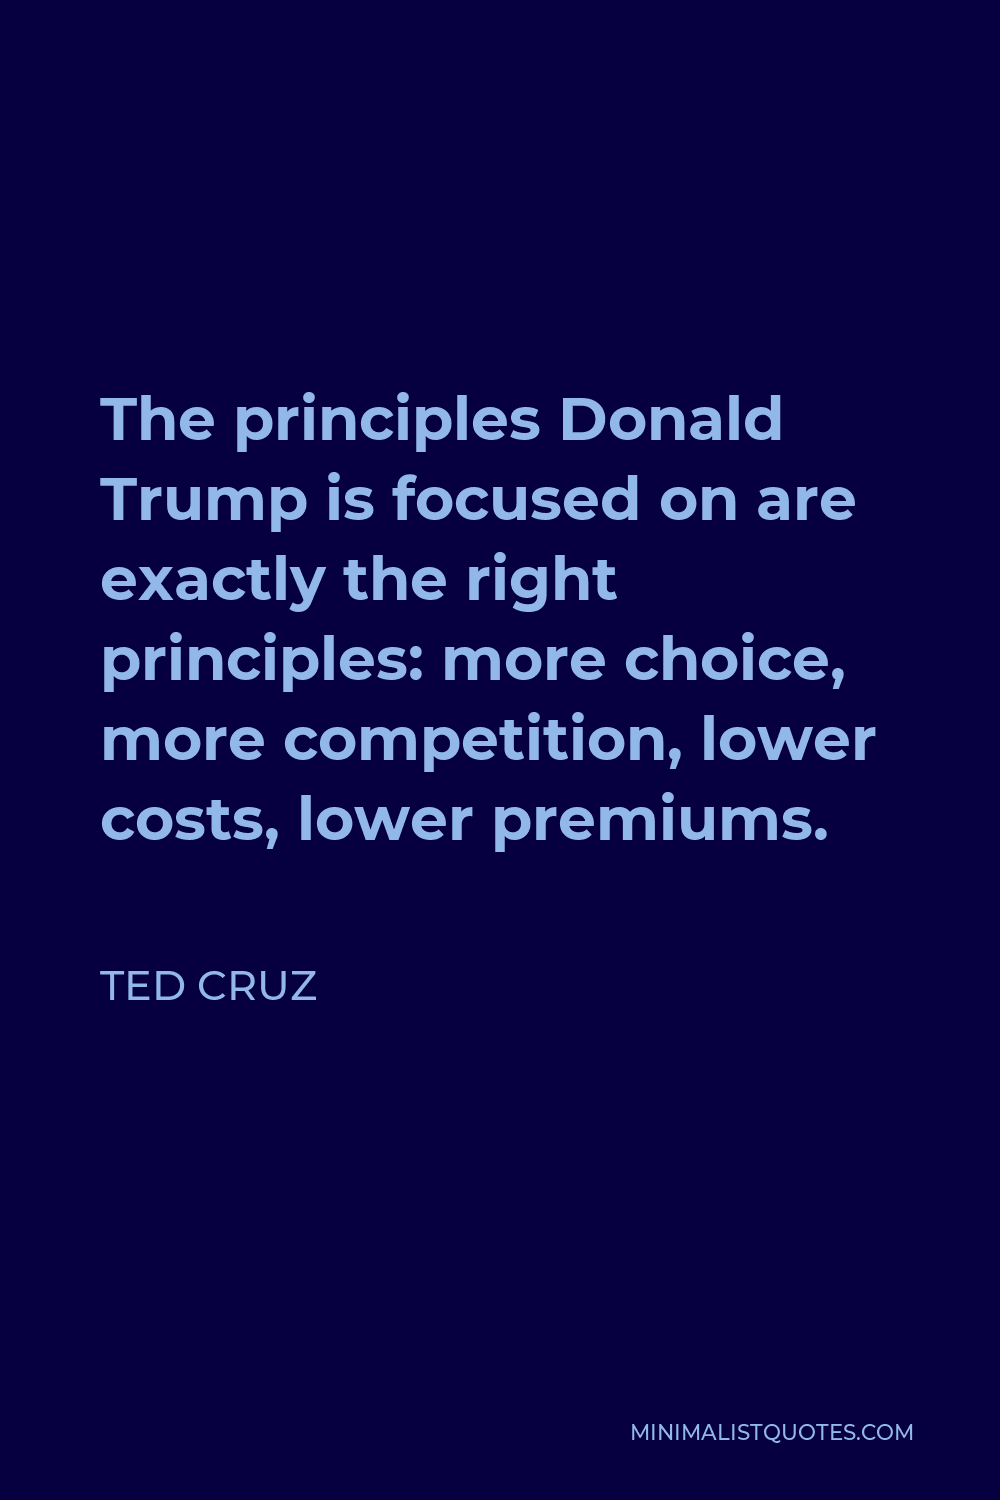 Ted Cruz Quote - The principles Donald Trump is focused on are exactly the right principles: more choice, more competition, lower costs, lower premiums.